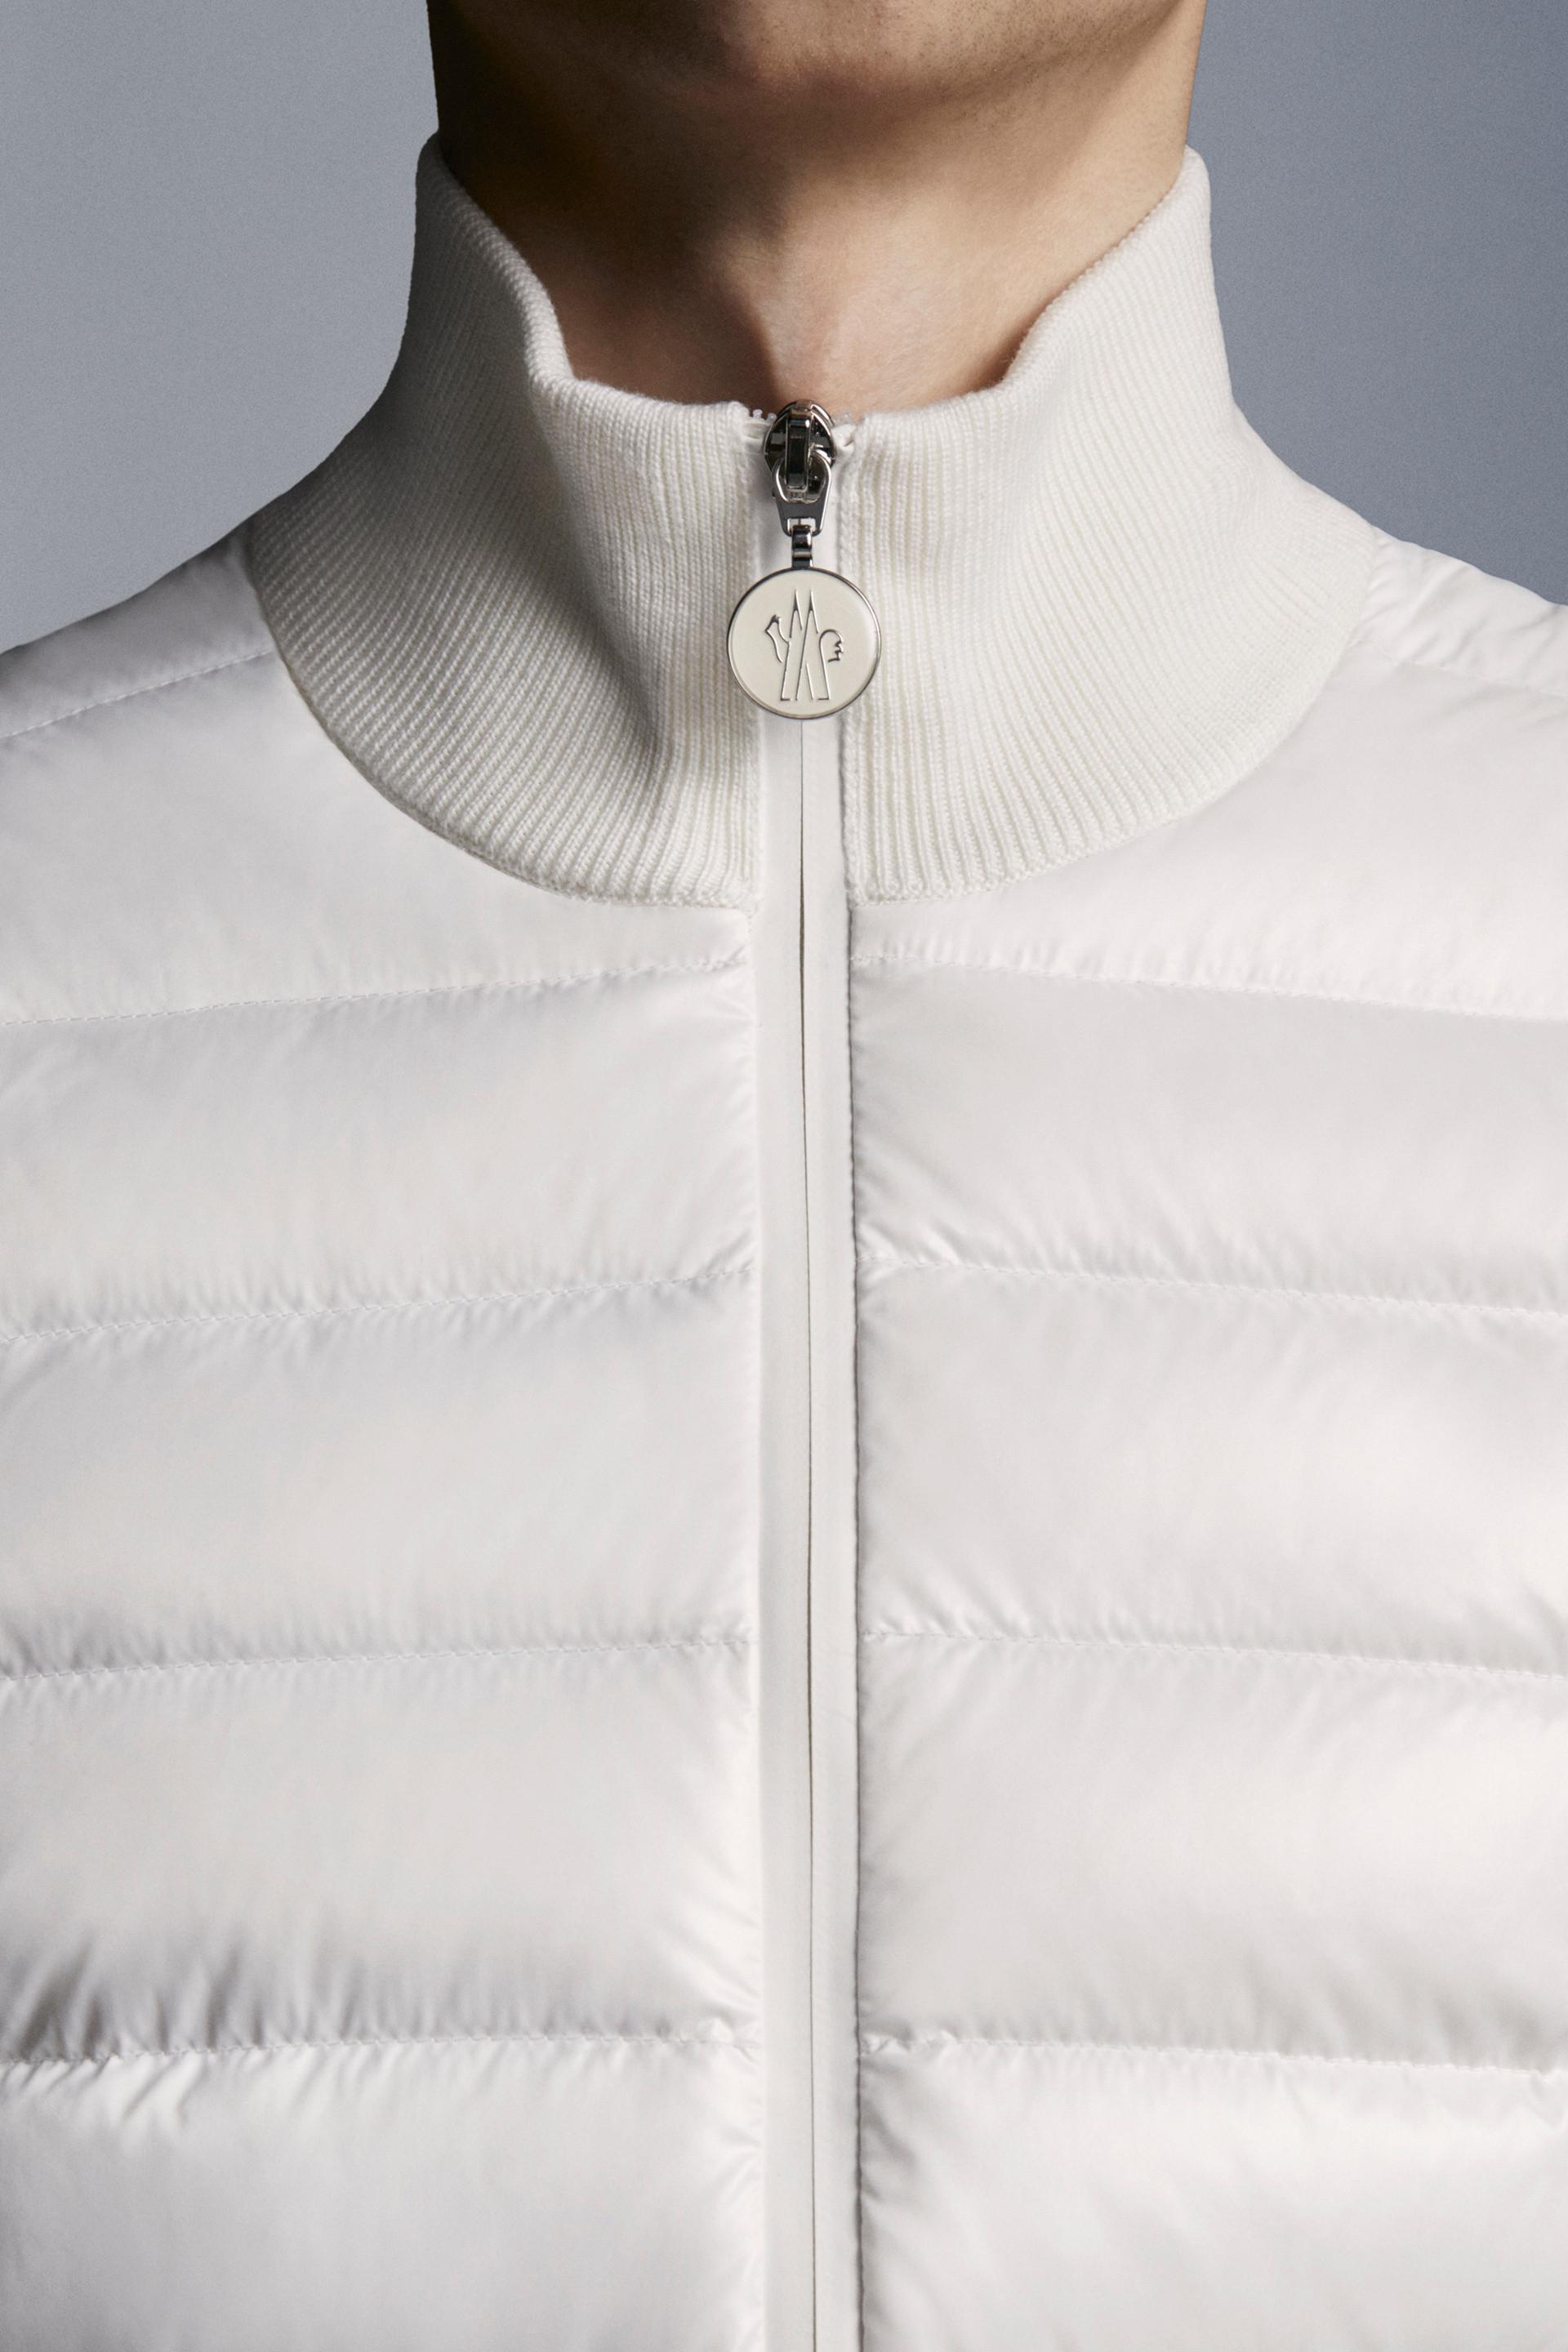 Moncler Wool And Nylon Cardigan in White for Men - Lyst